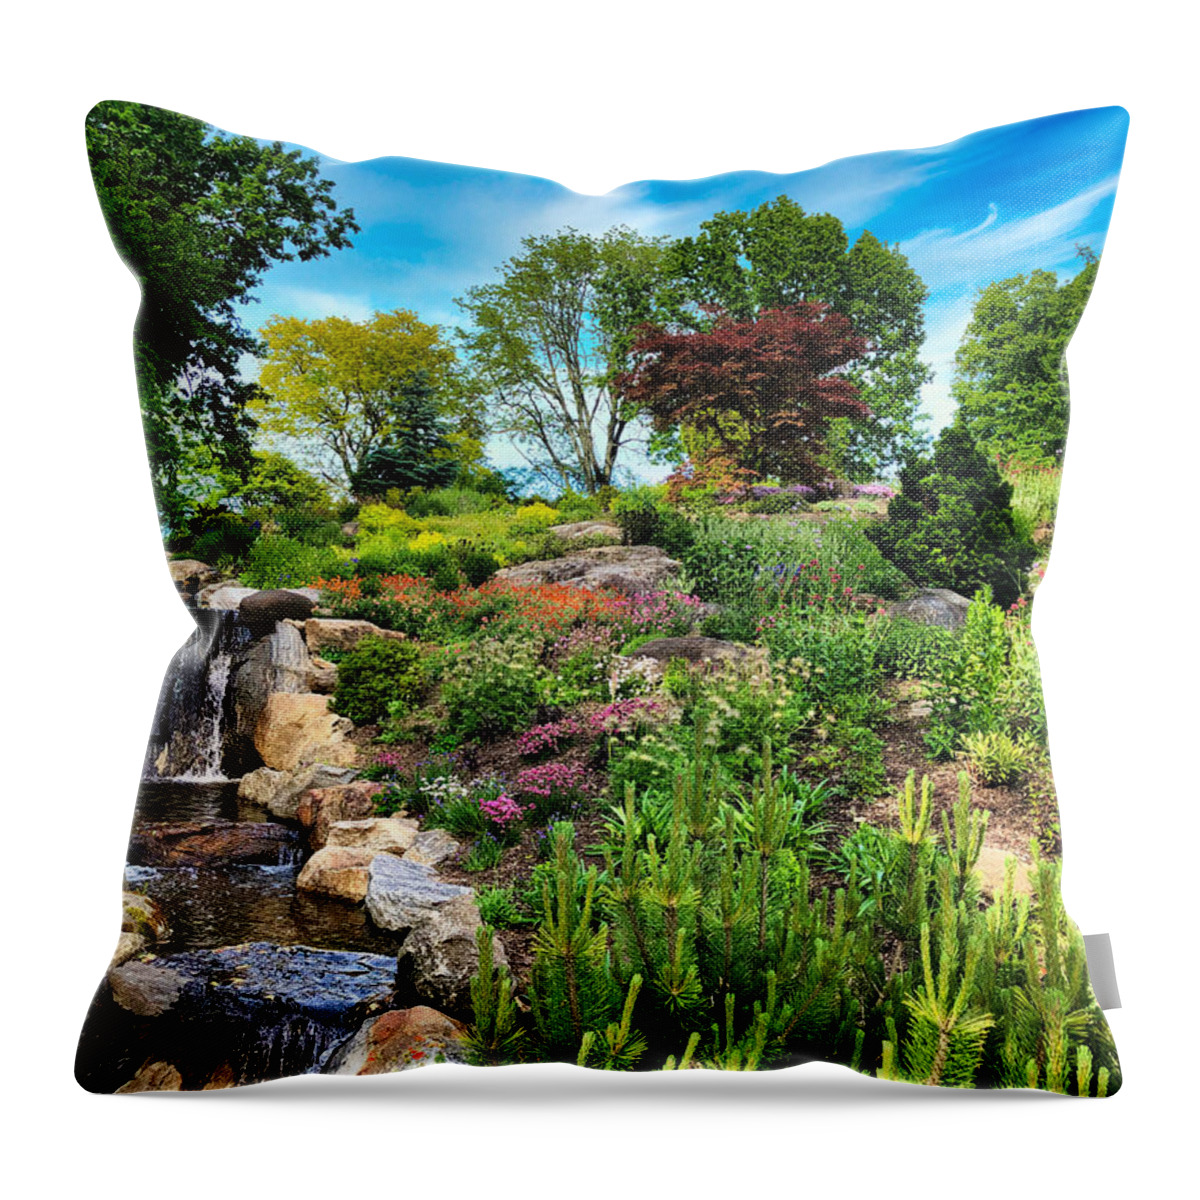 Untermyer Throw Pillow featuring the photograph Untermyer Park Landscape by Russel Considine